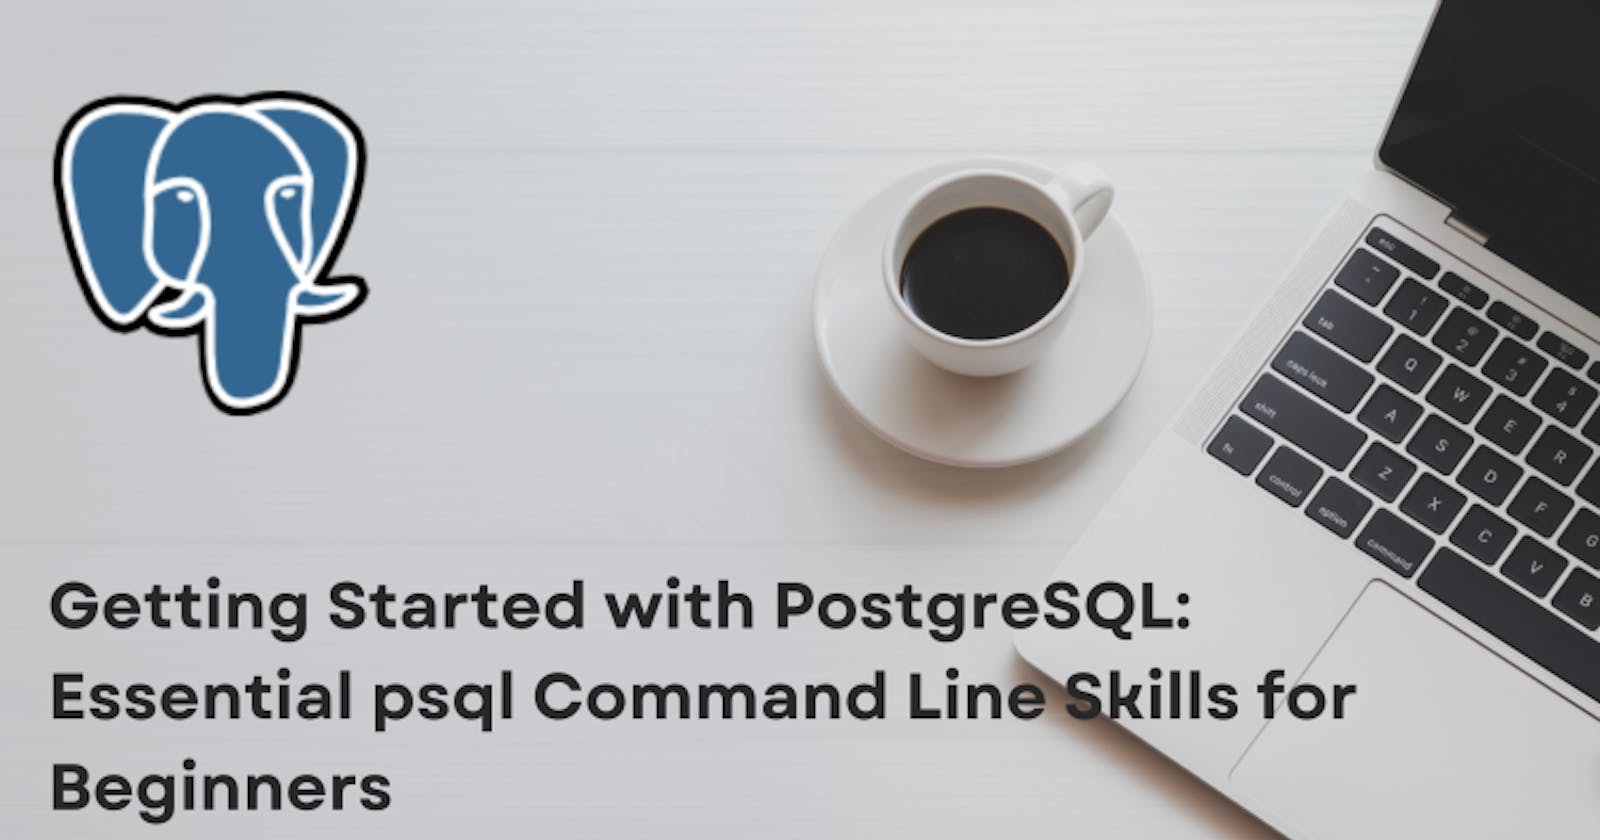 Getting Started with PostgreSQL: Essential psql Command Line Skills for Beginners